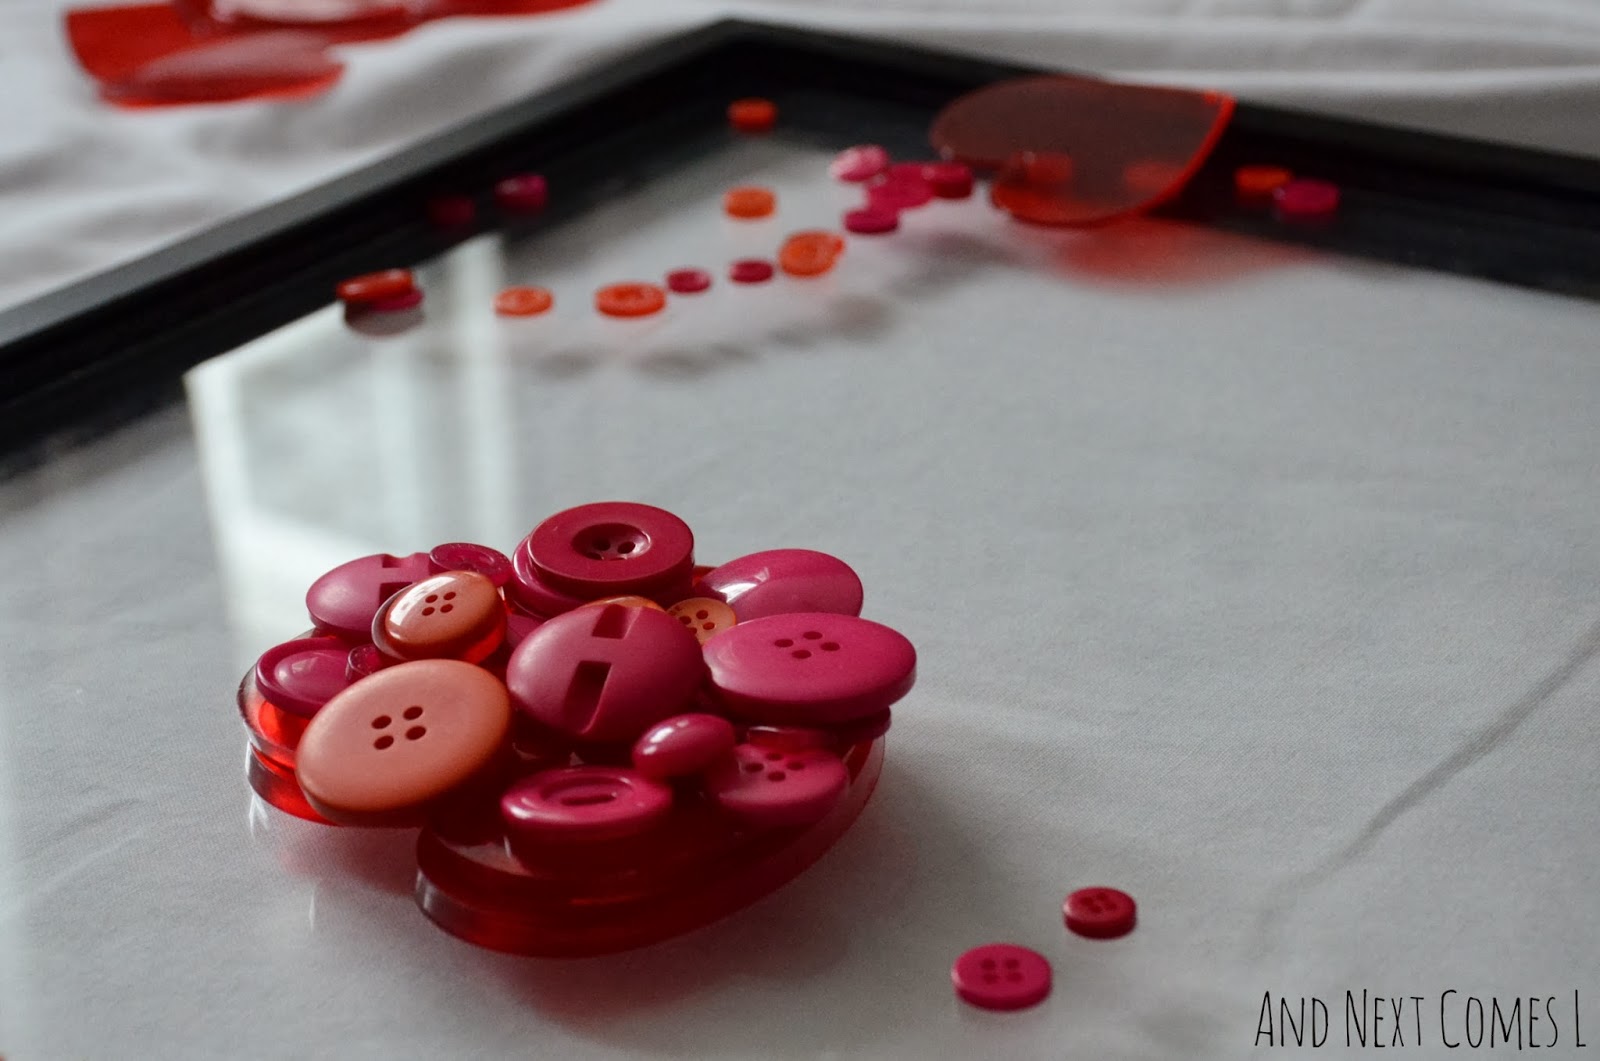 Playing with loose parts - a Valentine's Day activity